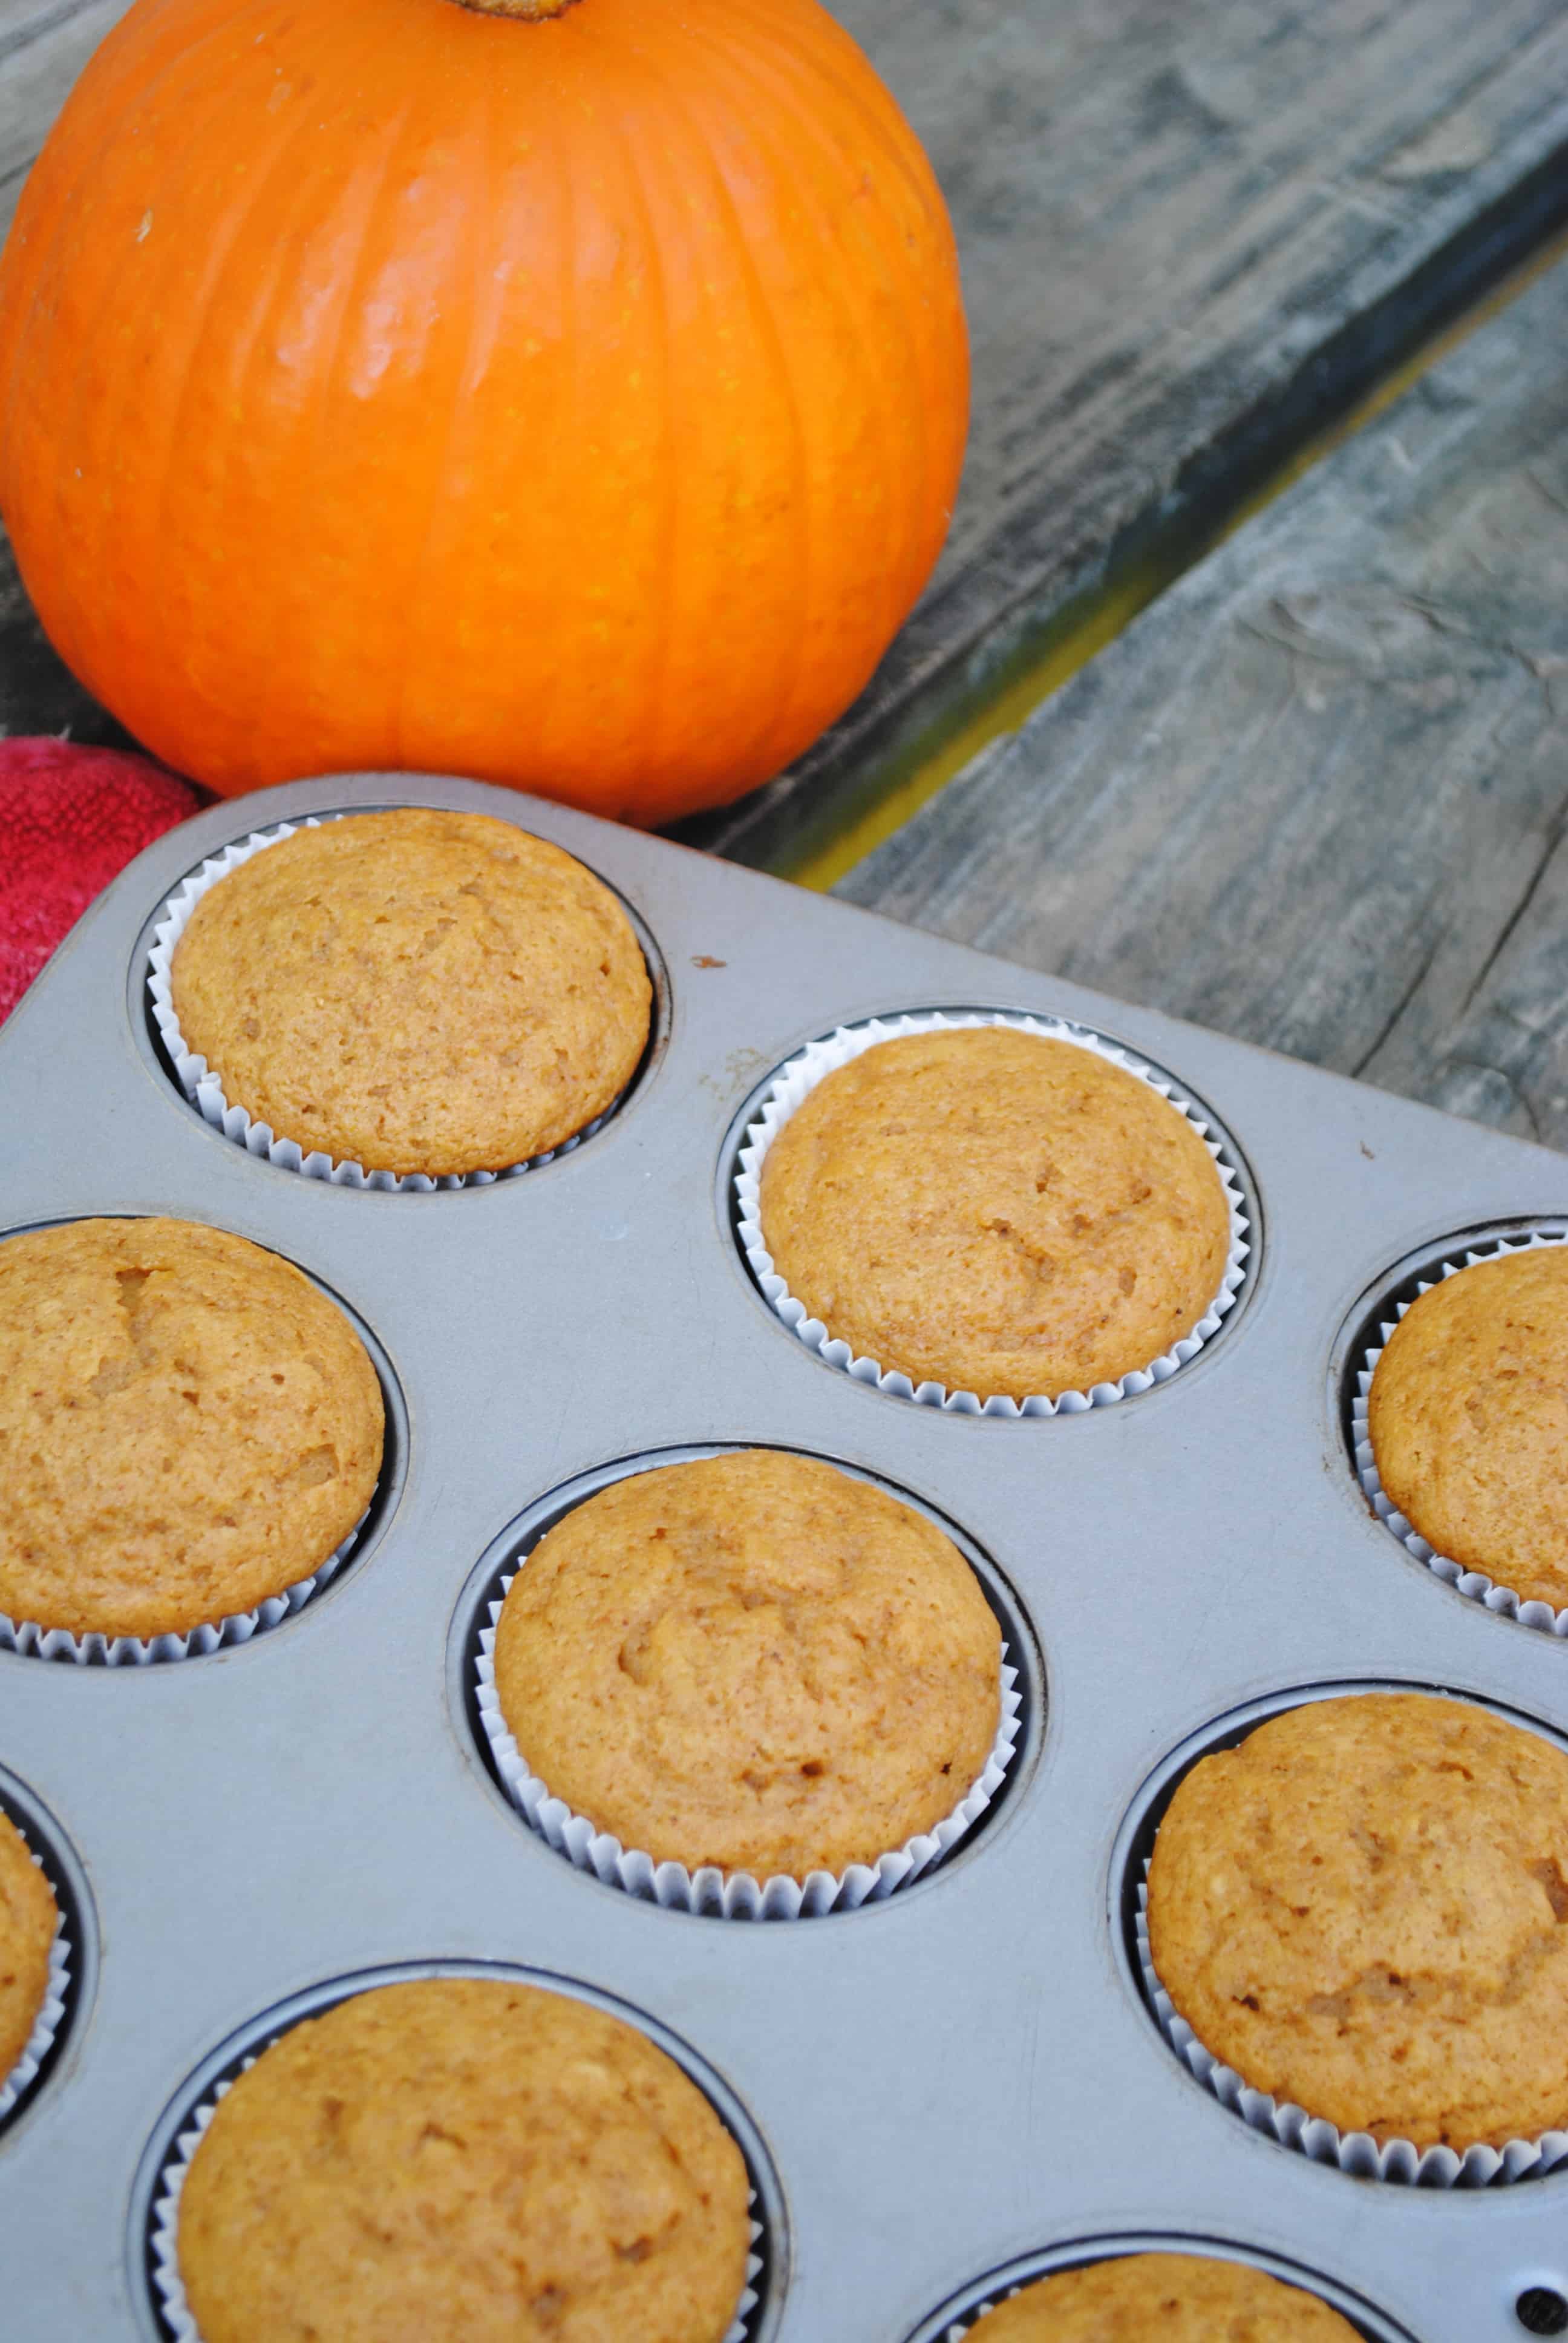 Pumpkin muffins made with fresh or canned pumpkin